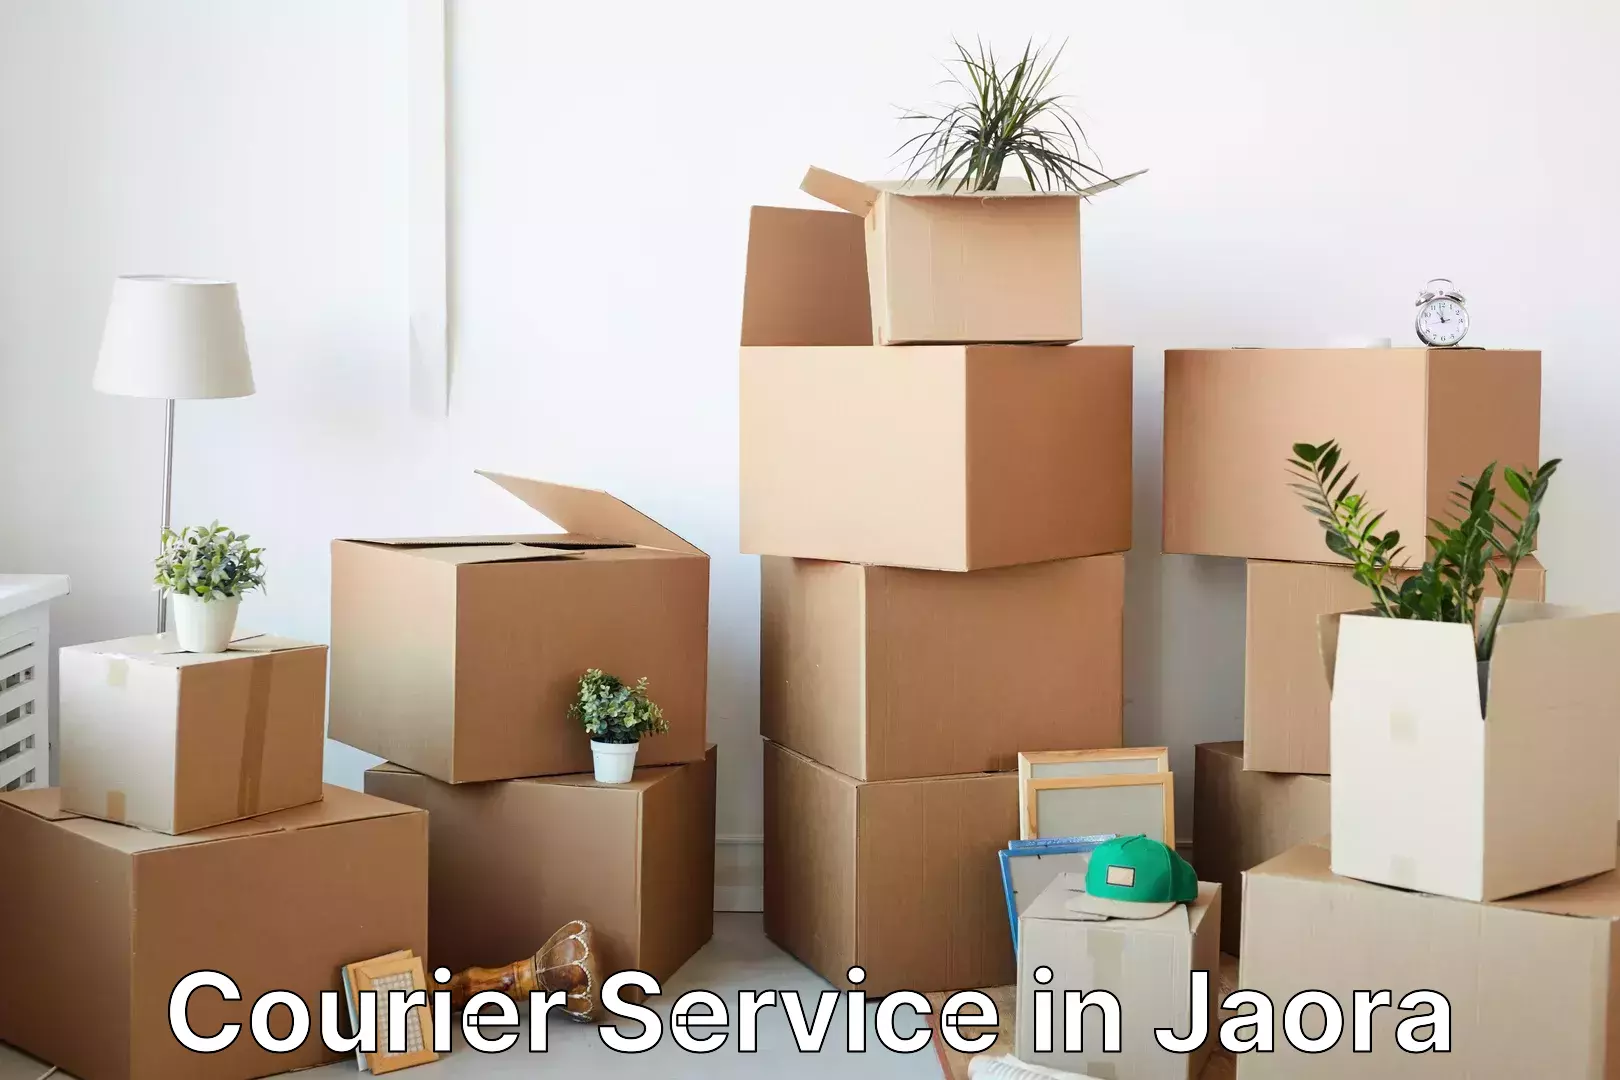 Package consolidation in Jaora